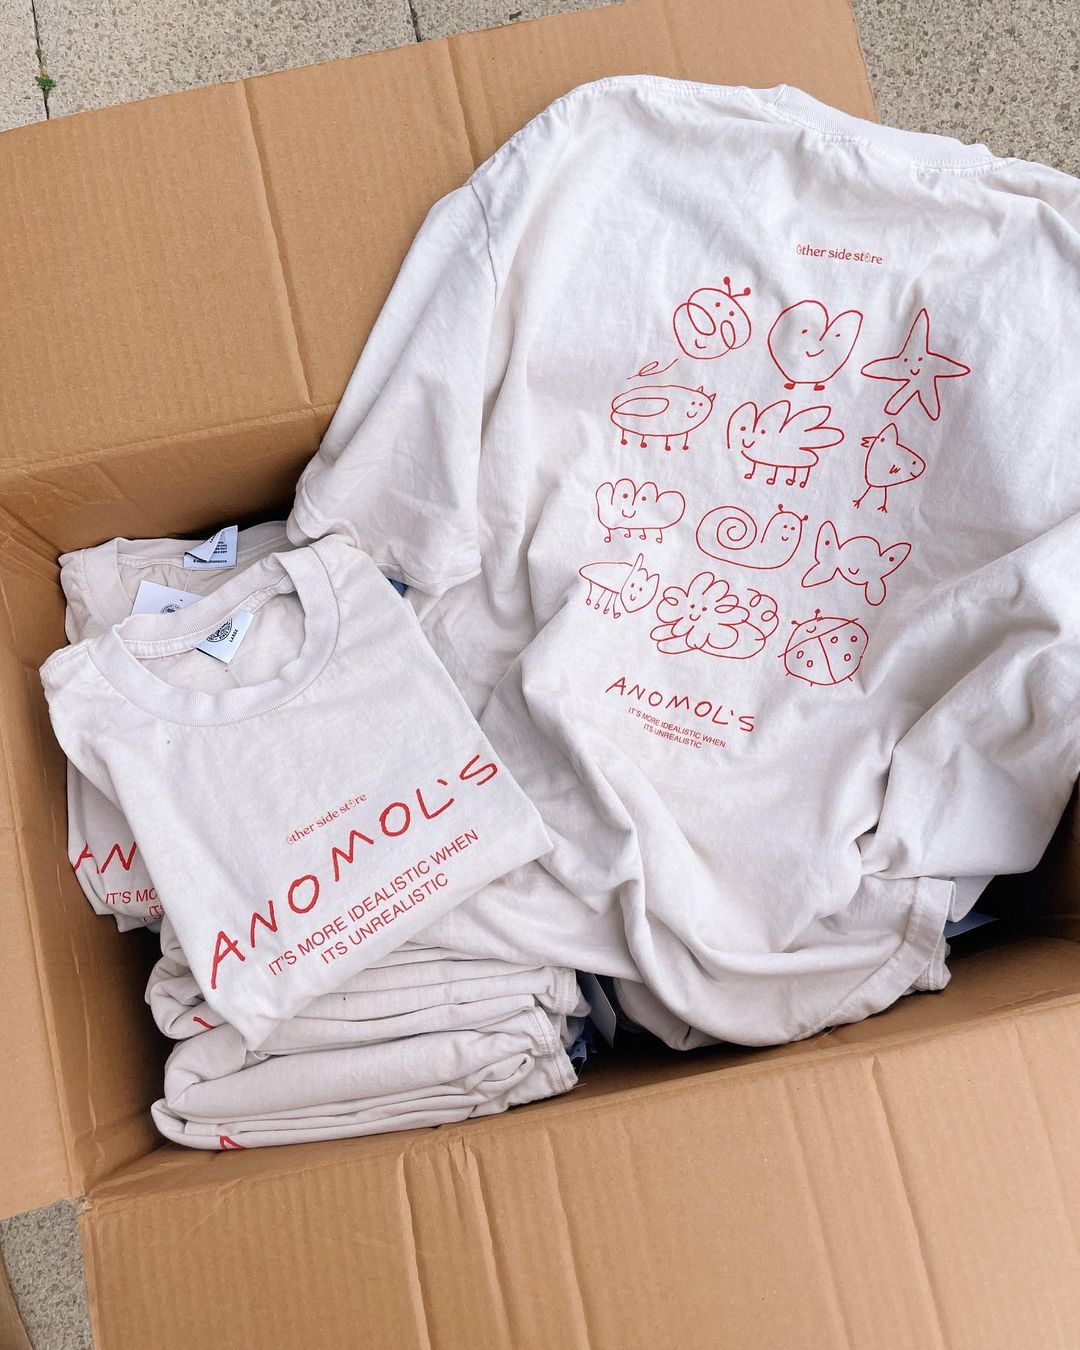 Other Side Store 'Anomols' Vintage Washed Tee - Cream